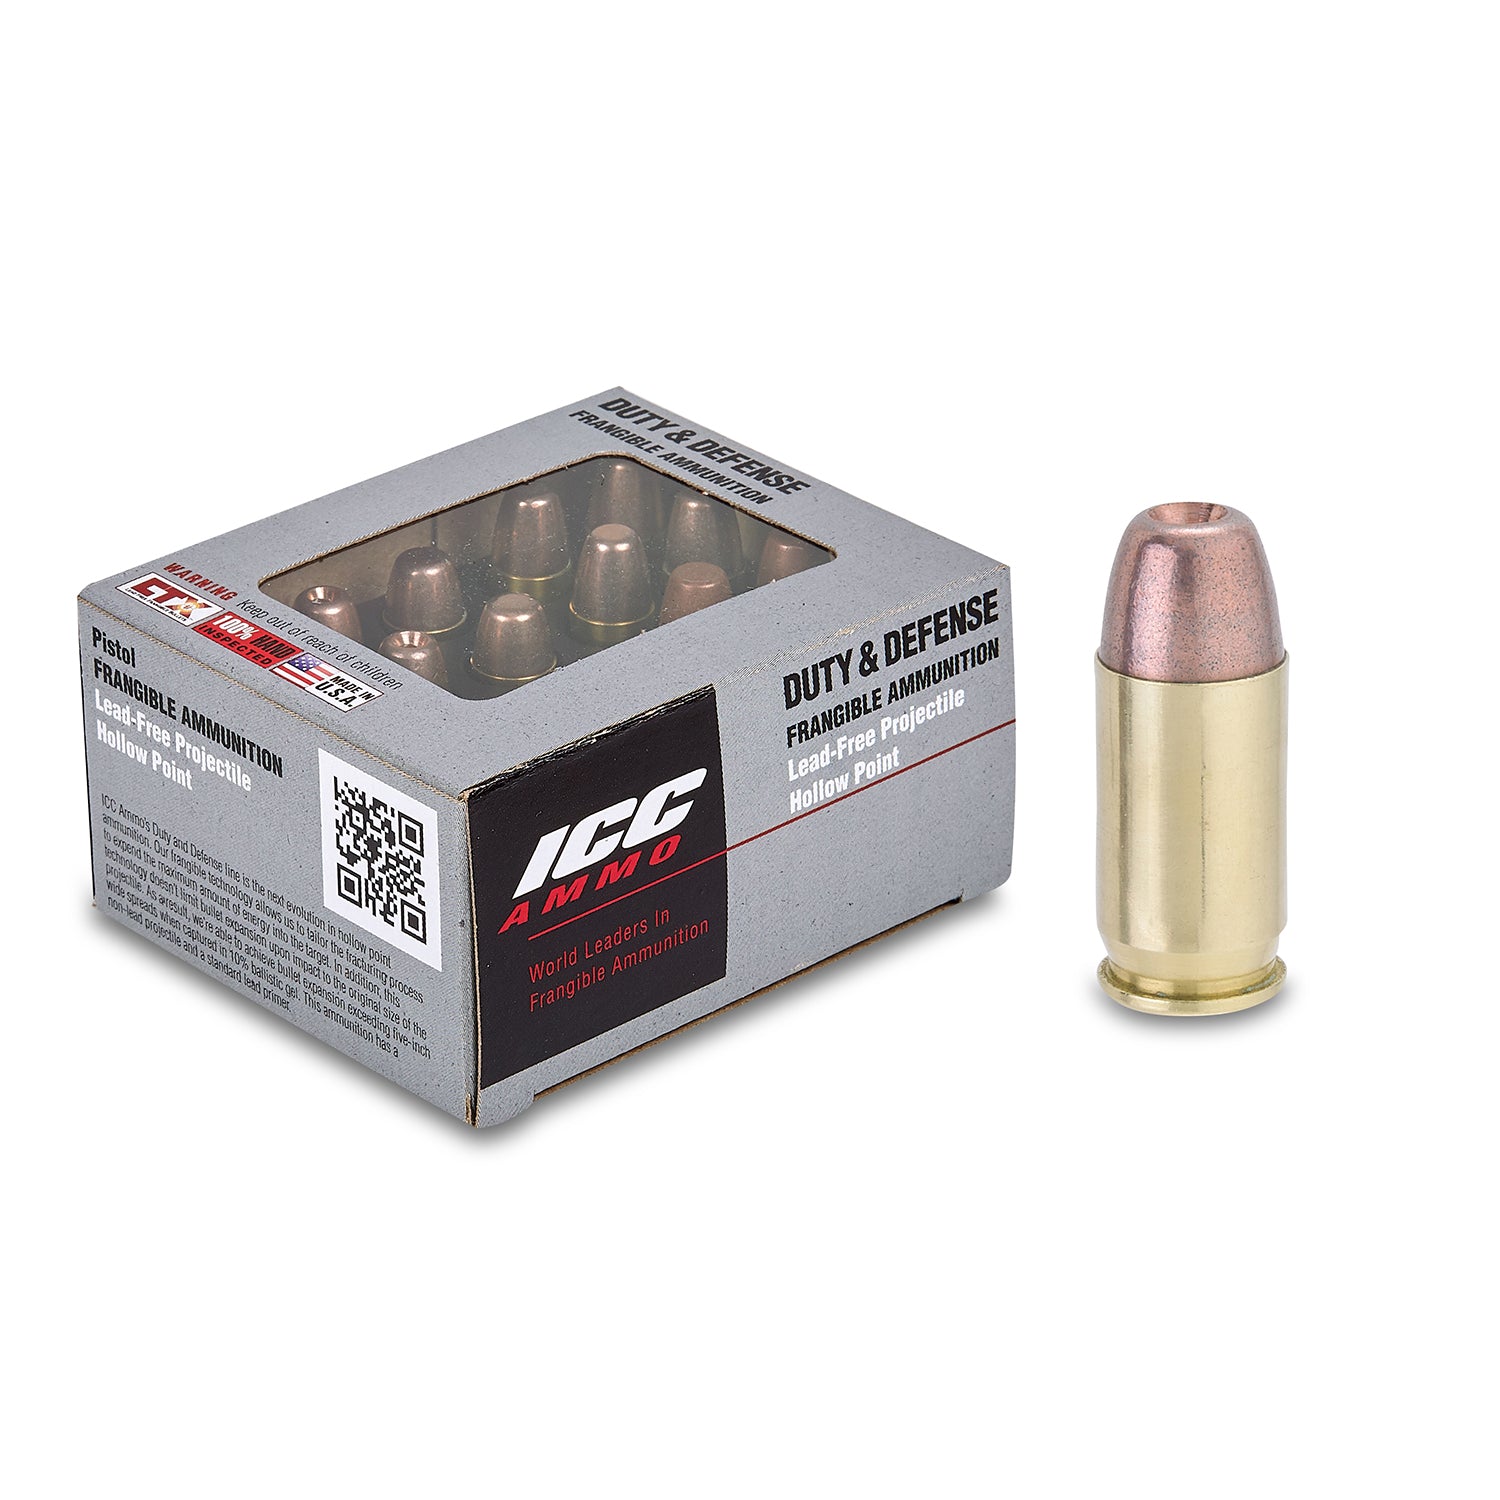 .380 ACP 75 gr Hollow Point (CASE OF 500 ROUNDS)